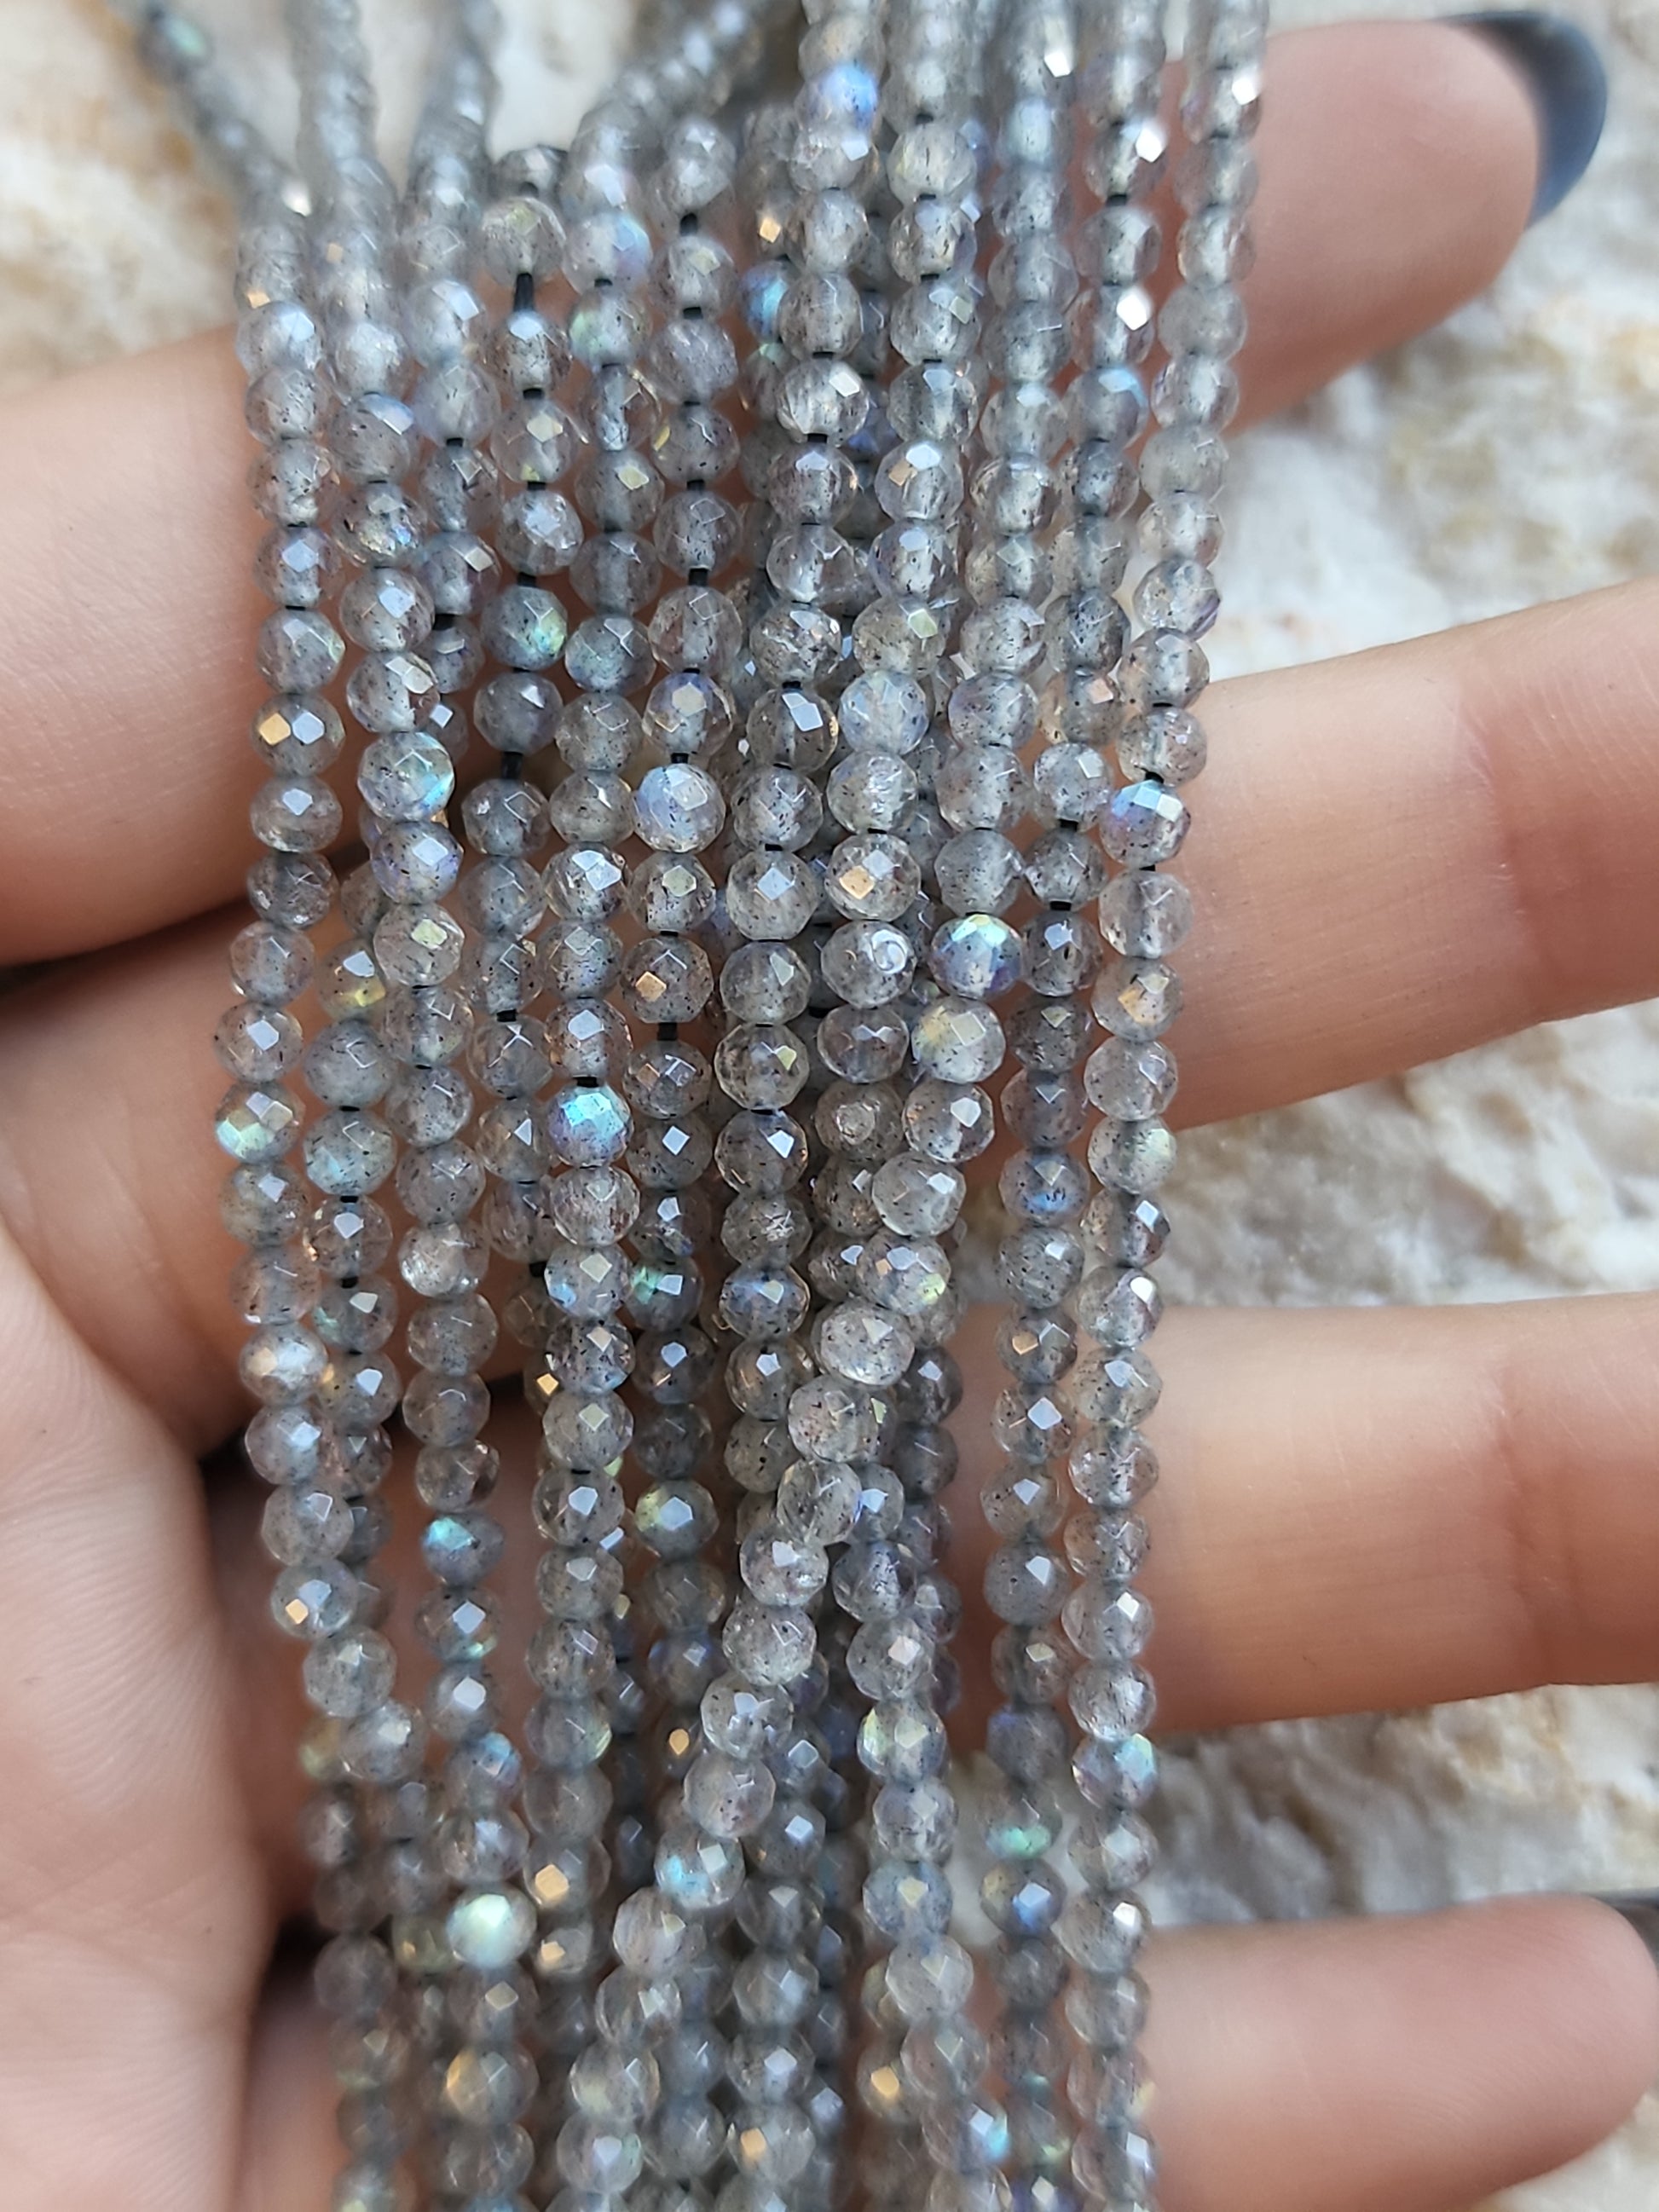 Crafting supplies such as labradorite beads available at wholesale and retail prices, only at our crystal shop in San Diego!